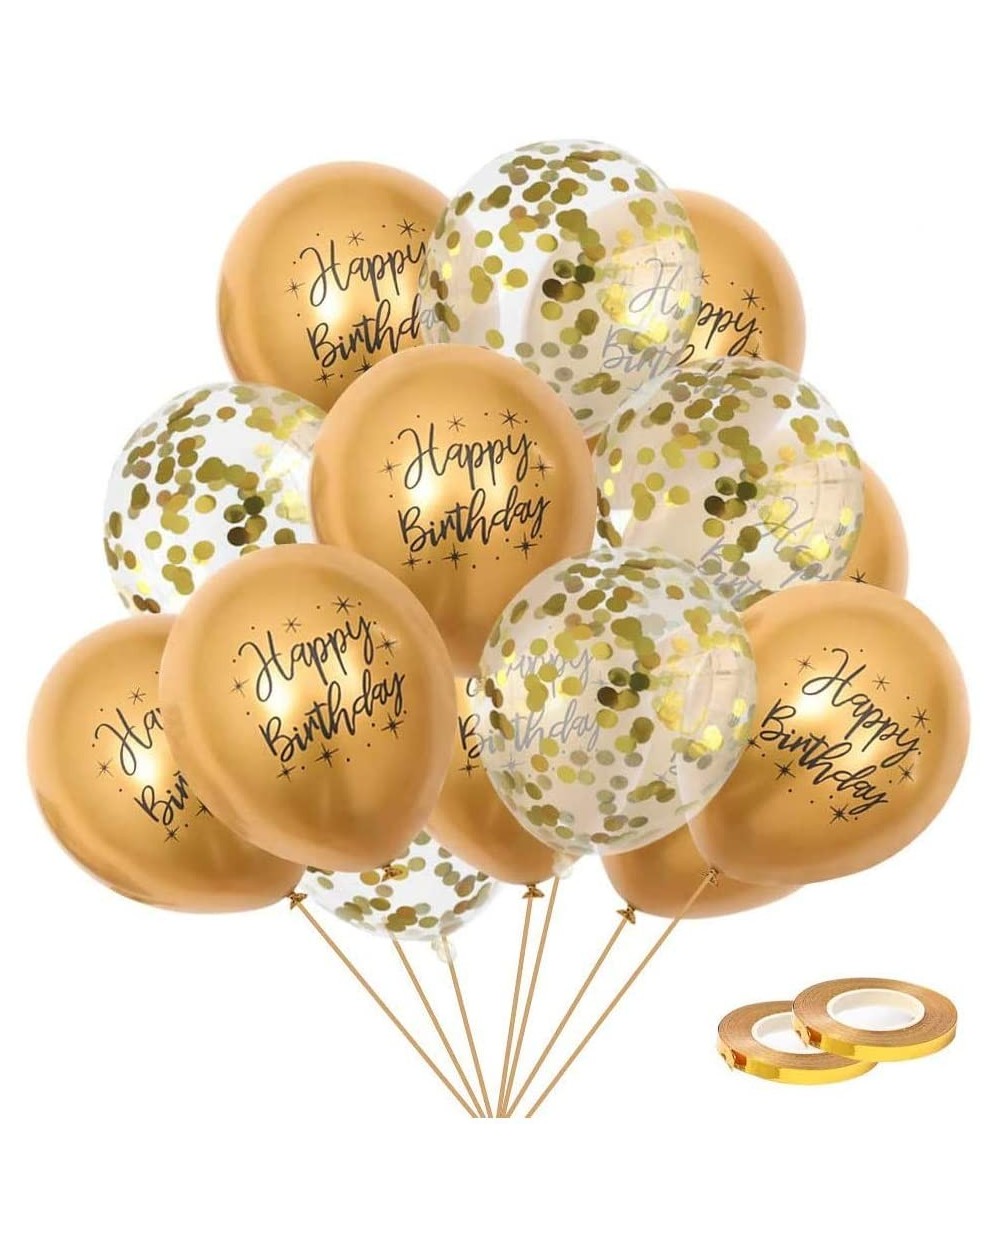 Balloons 12inch 50pcs Gold Chrome Metallic Latex Balloons Printed Happy Birthday Balloons and Gold Confetti Balloons for Baby...